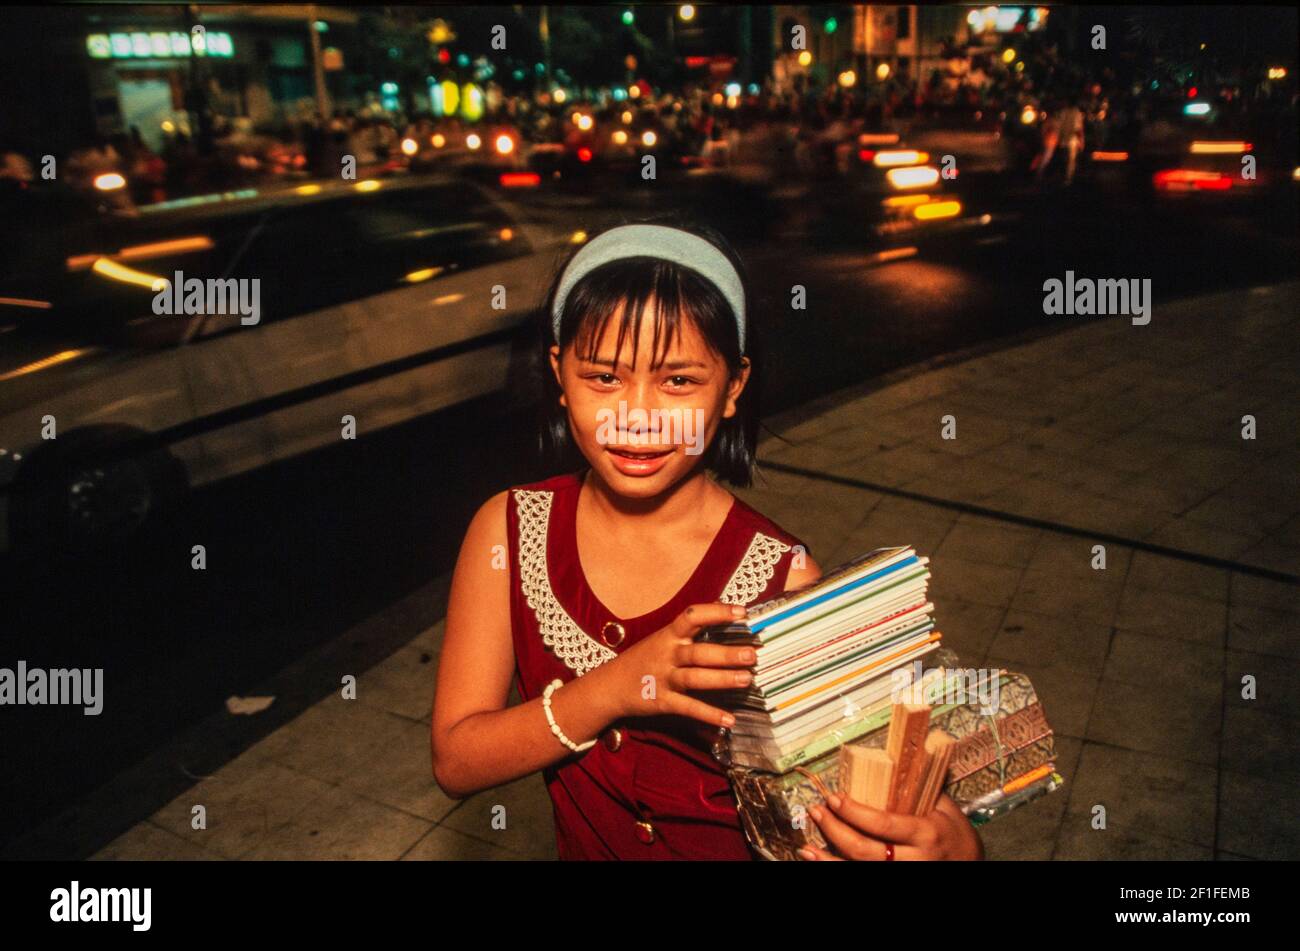 A young girl selling tourist materials on the street, Ho Chi Minh City, Vietnam, June 1980 Stock Photo